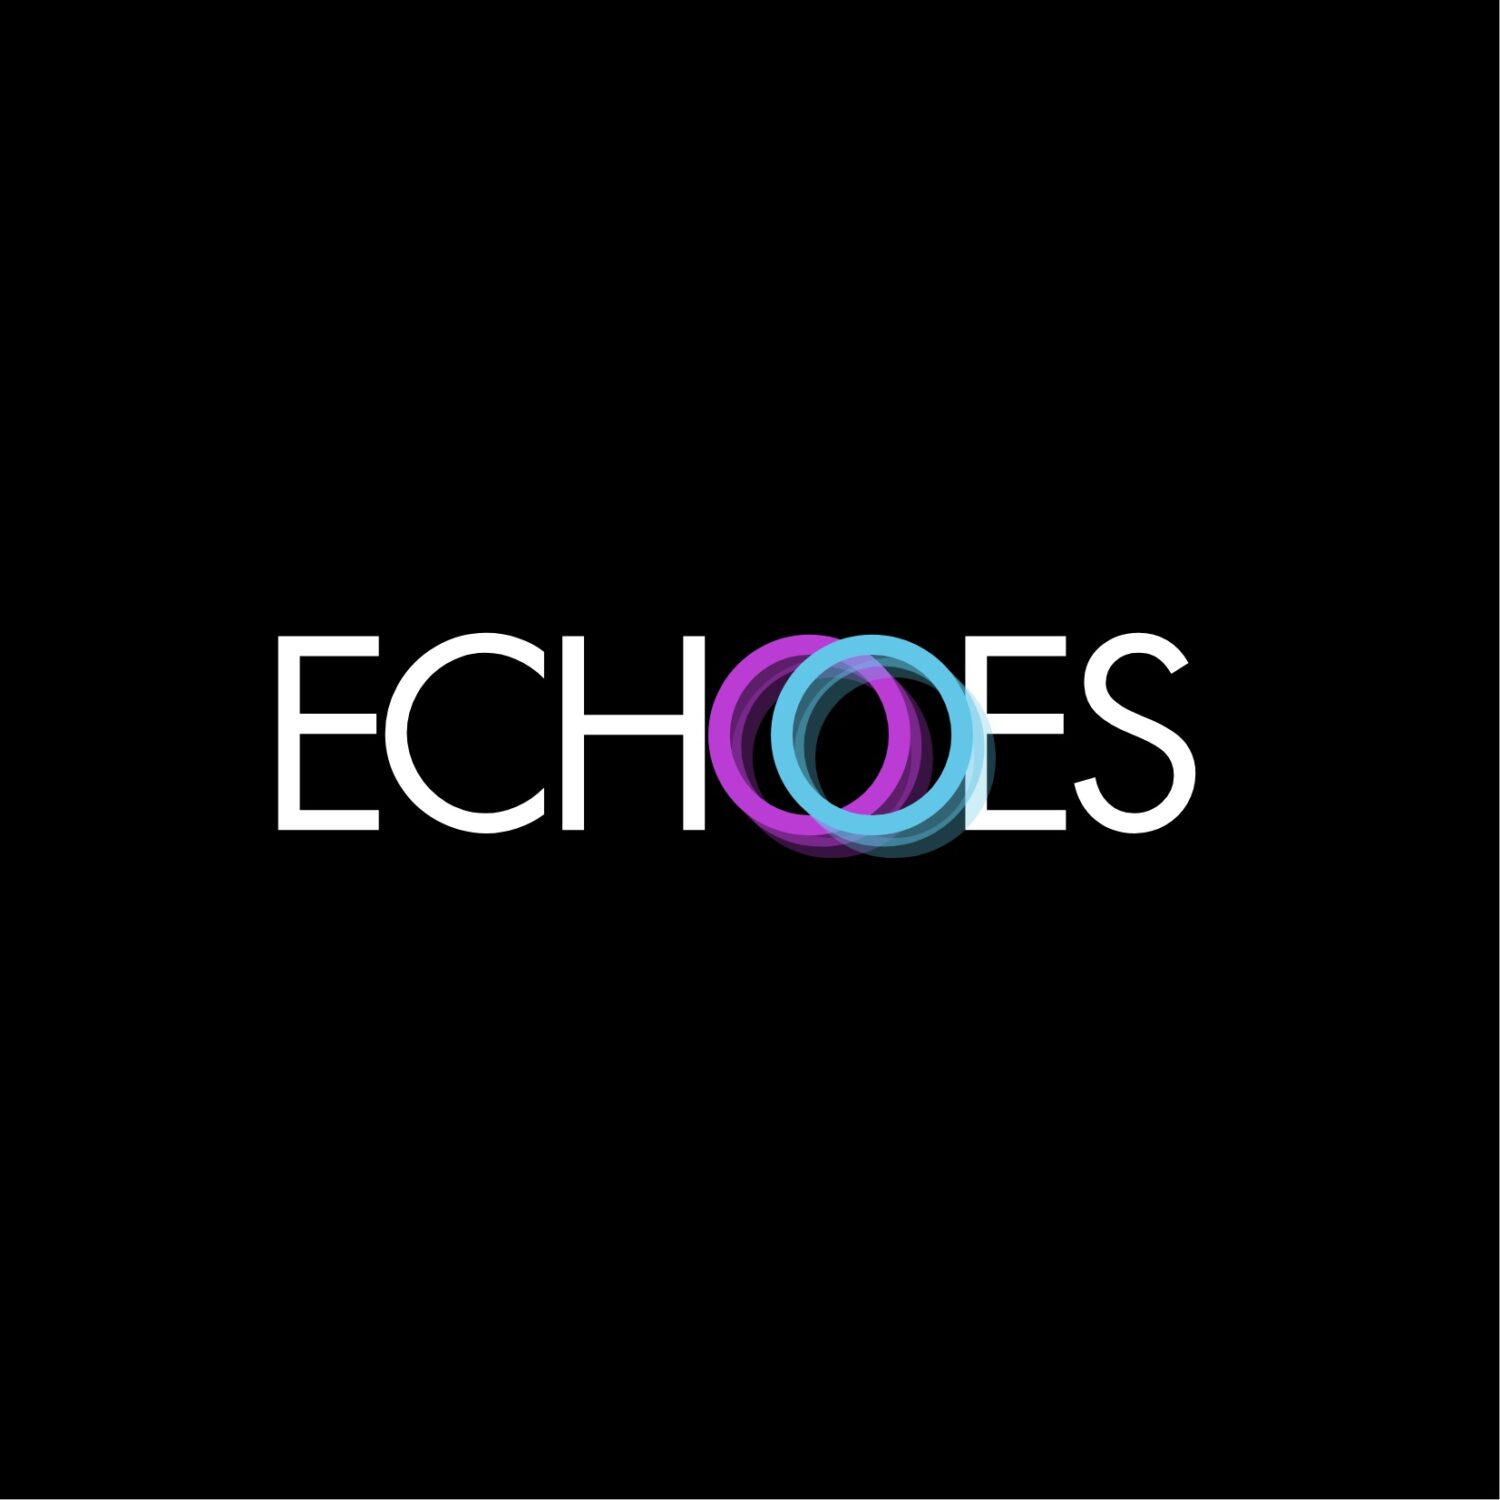 Echoes double O